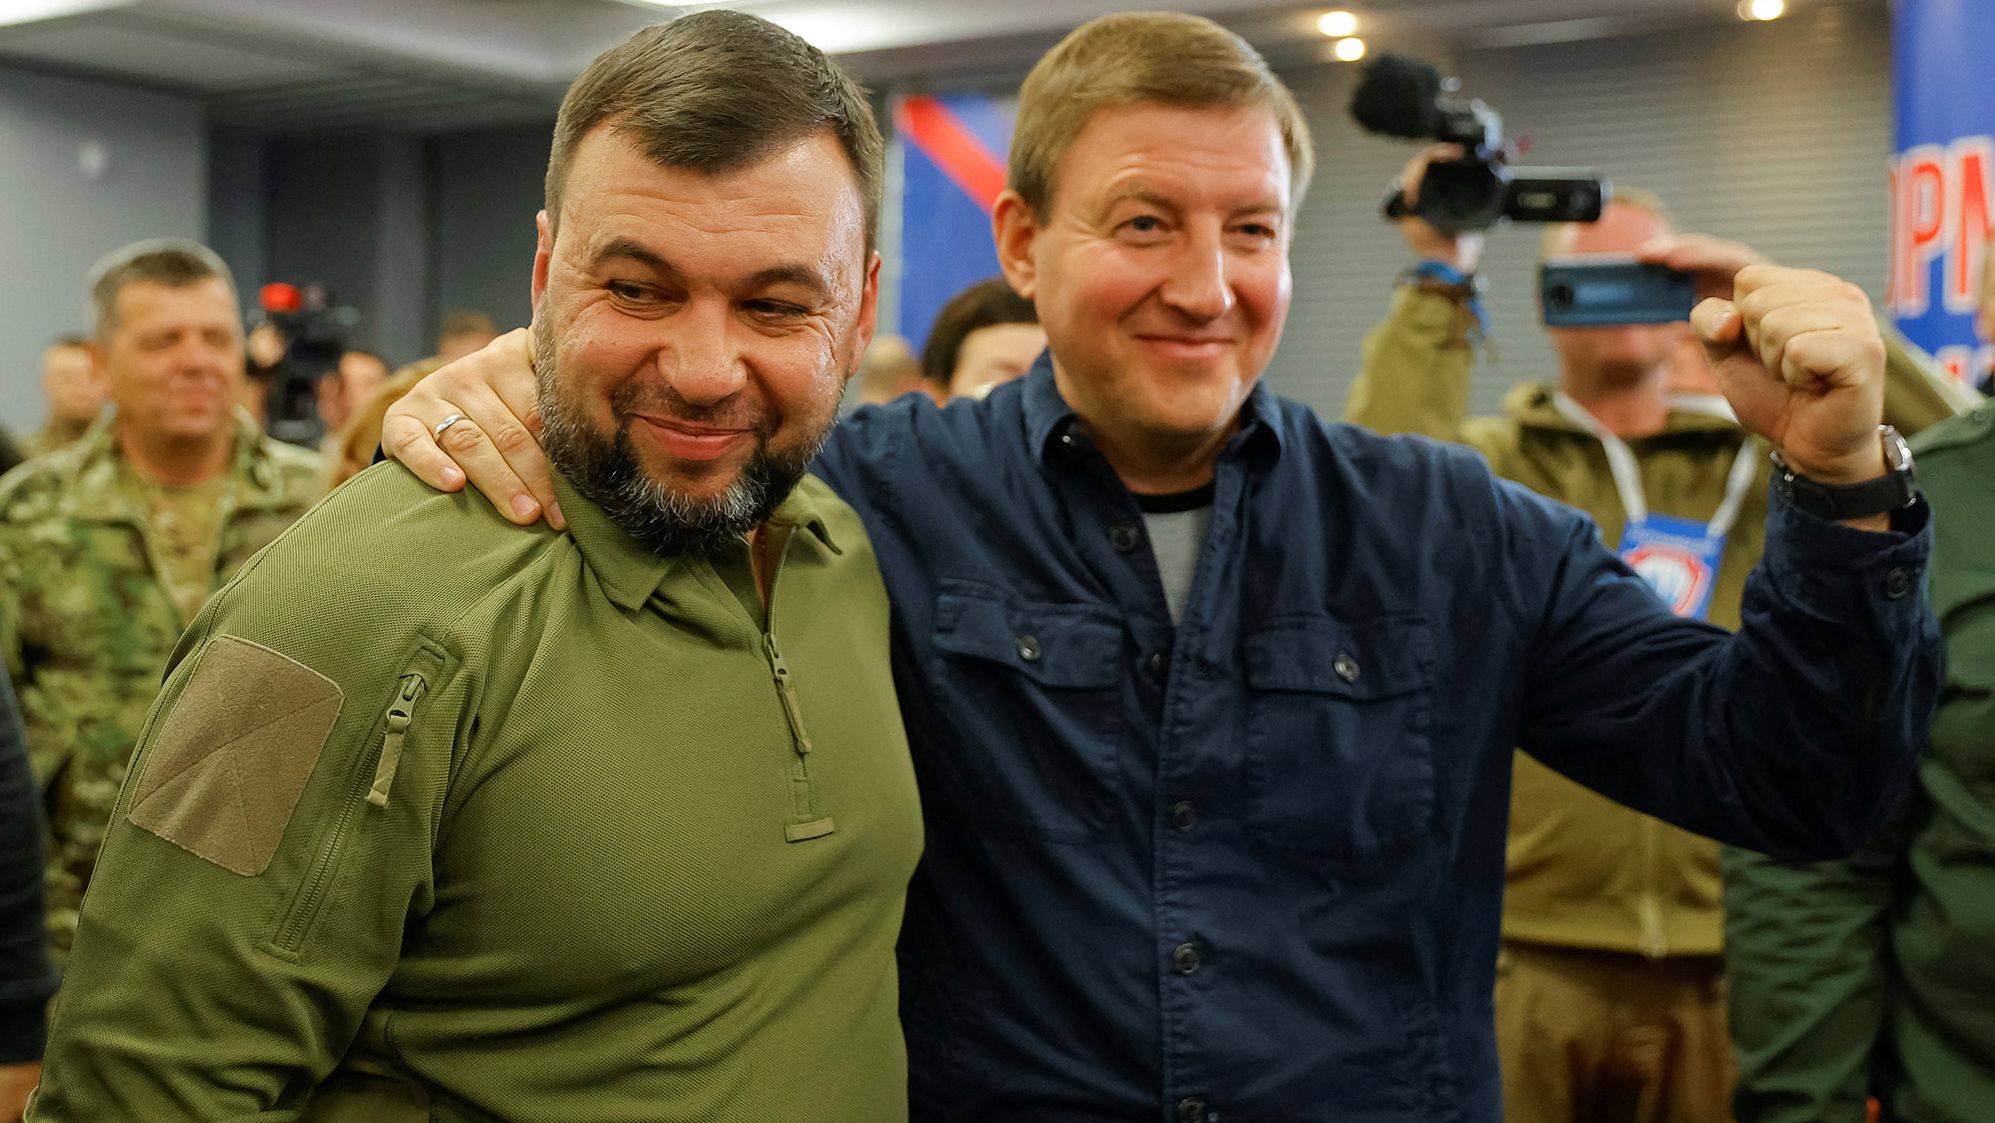 Head of the separatist self-proclaimed Donetsk People's Republic (DPR) Denis Pushilin, left, and Secretary of the United Russia Party's General Council Andrey Turchak attend a news conference on preliminary <a href="https://edition.cnn.com/europe/live-news/russia-ukraine-war-news-09-28-22/h_8def30f207fe9997f5a09a7144e0afaf" target="_blank">results of a referendum on the joining of the DPR to Russia,</a> in Donetsk, Ukraine, on September 27.